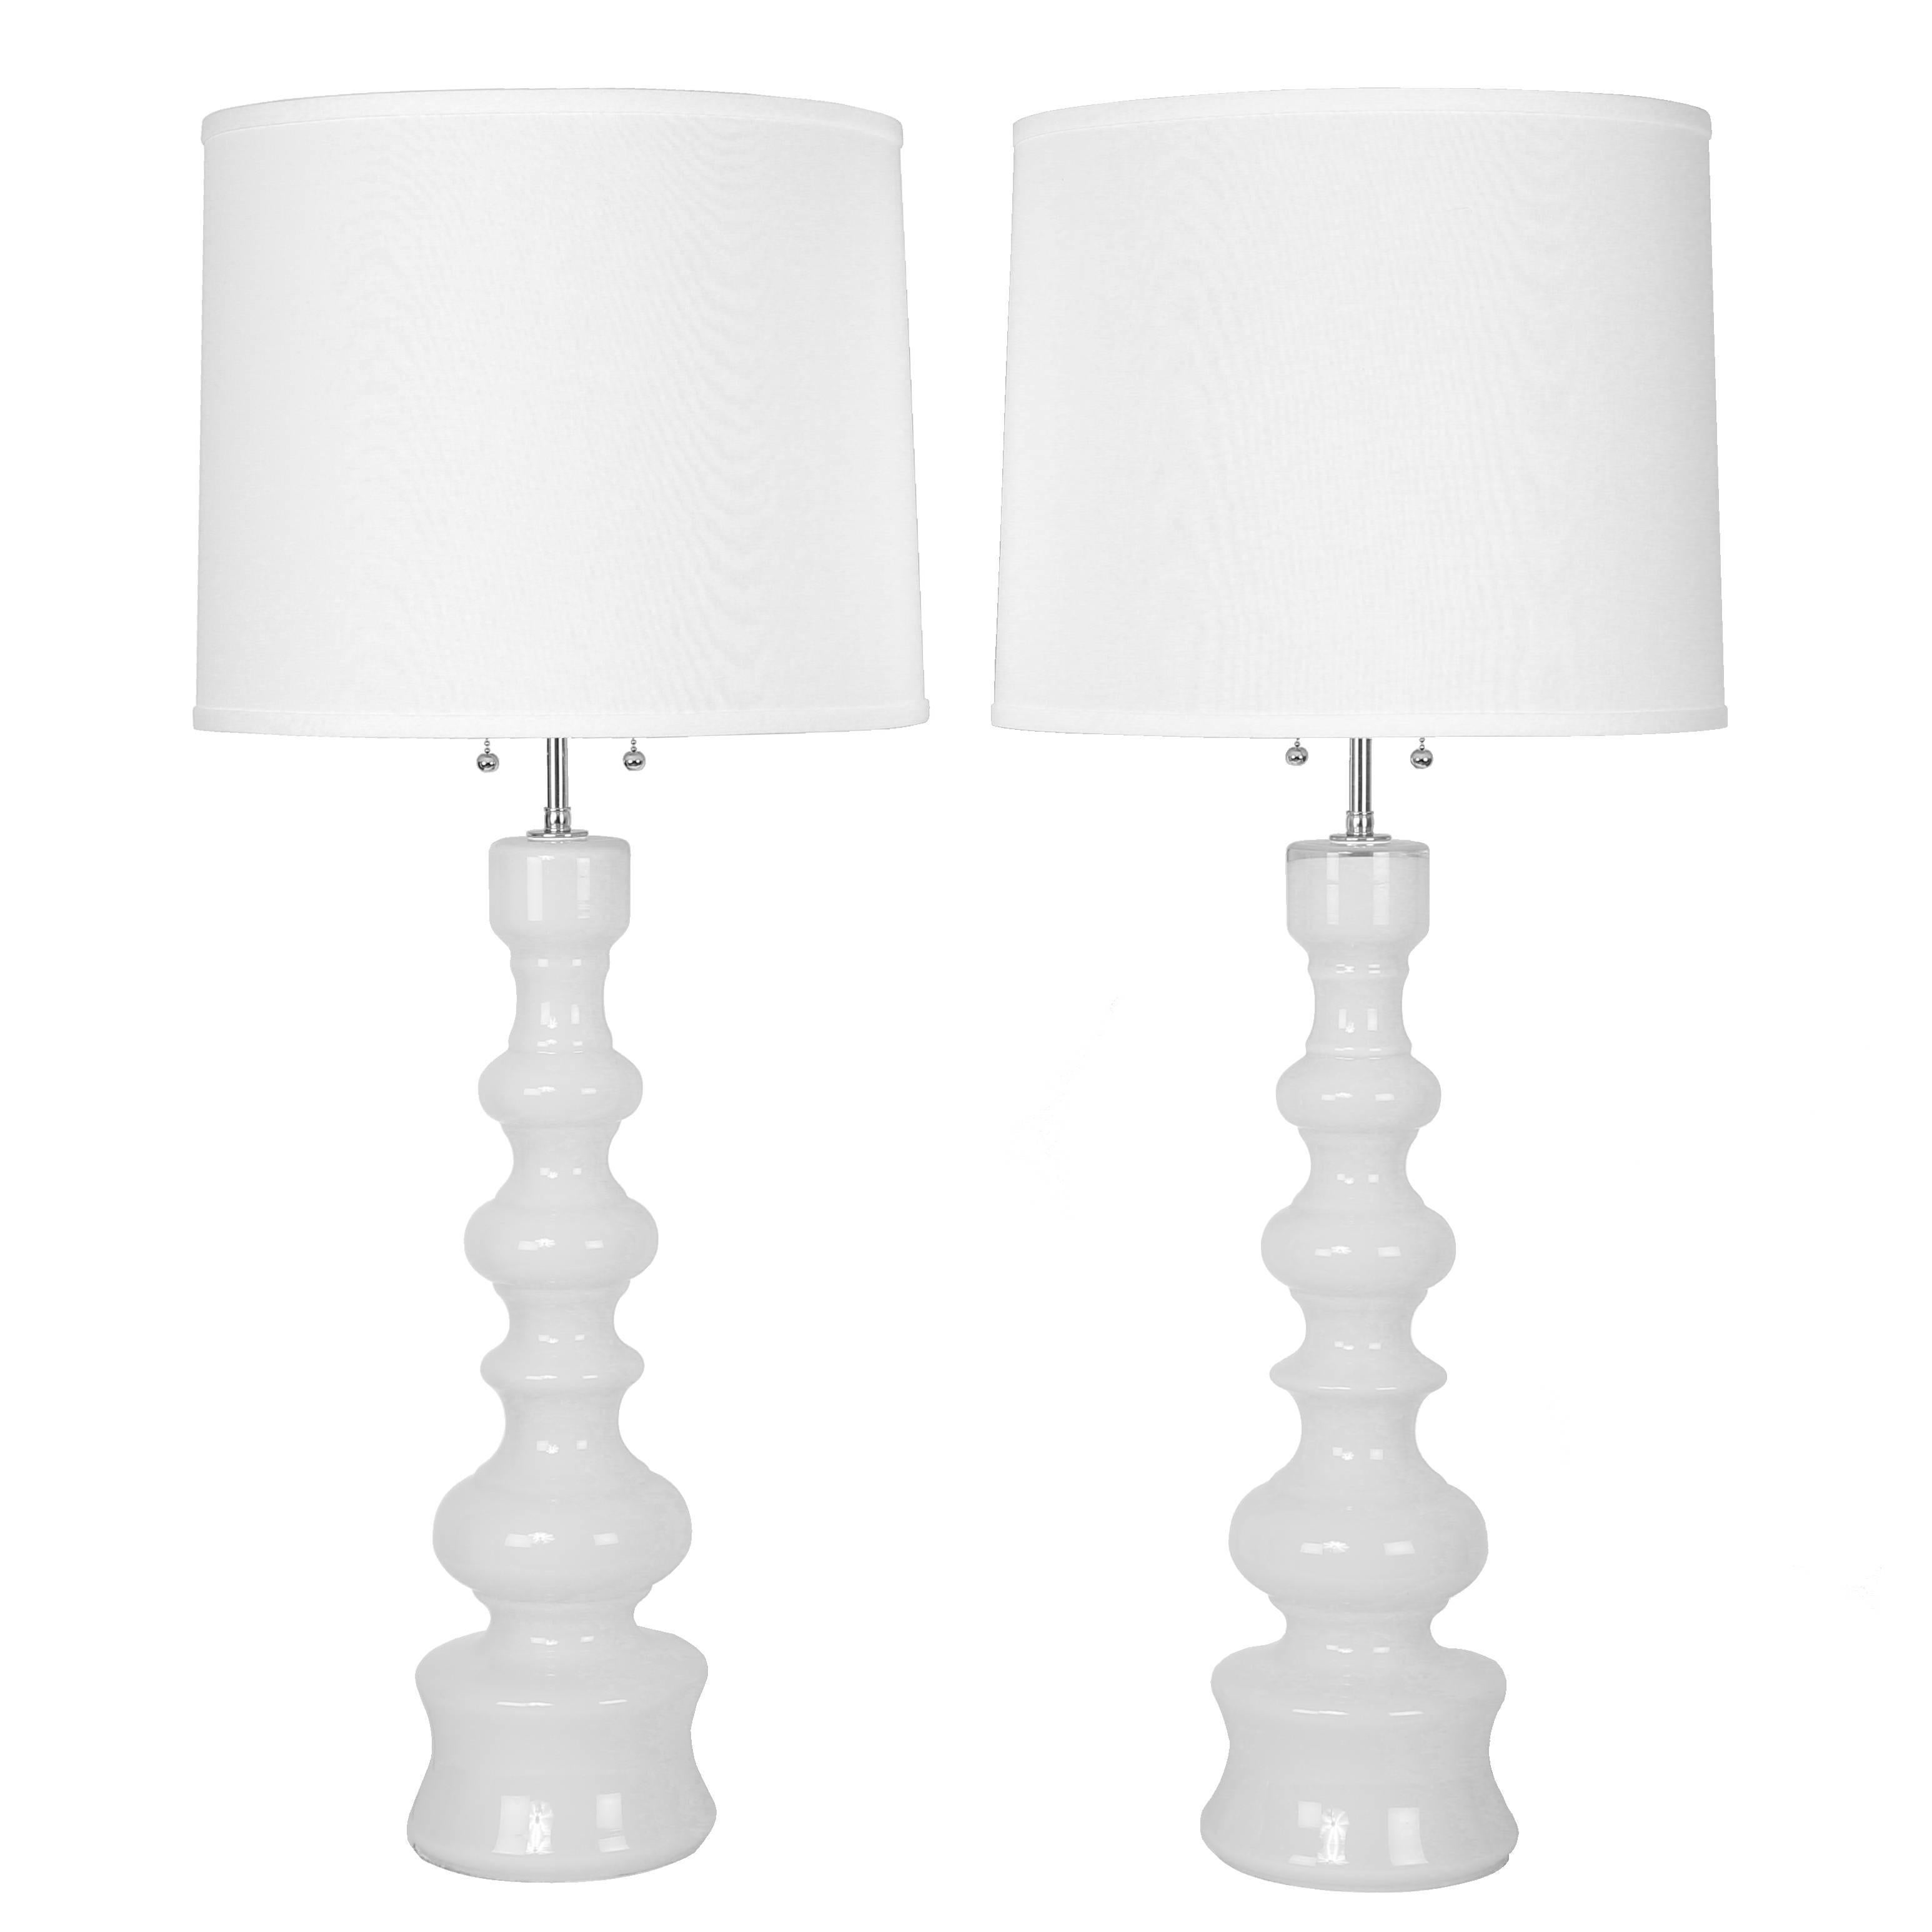 Tall White Glass Table Lamps by Lindshammar Studio of Sweden, circa 1960s For Sale